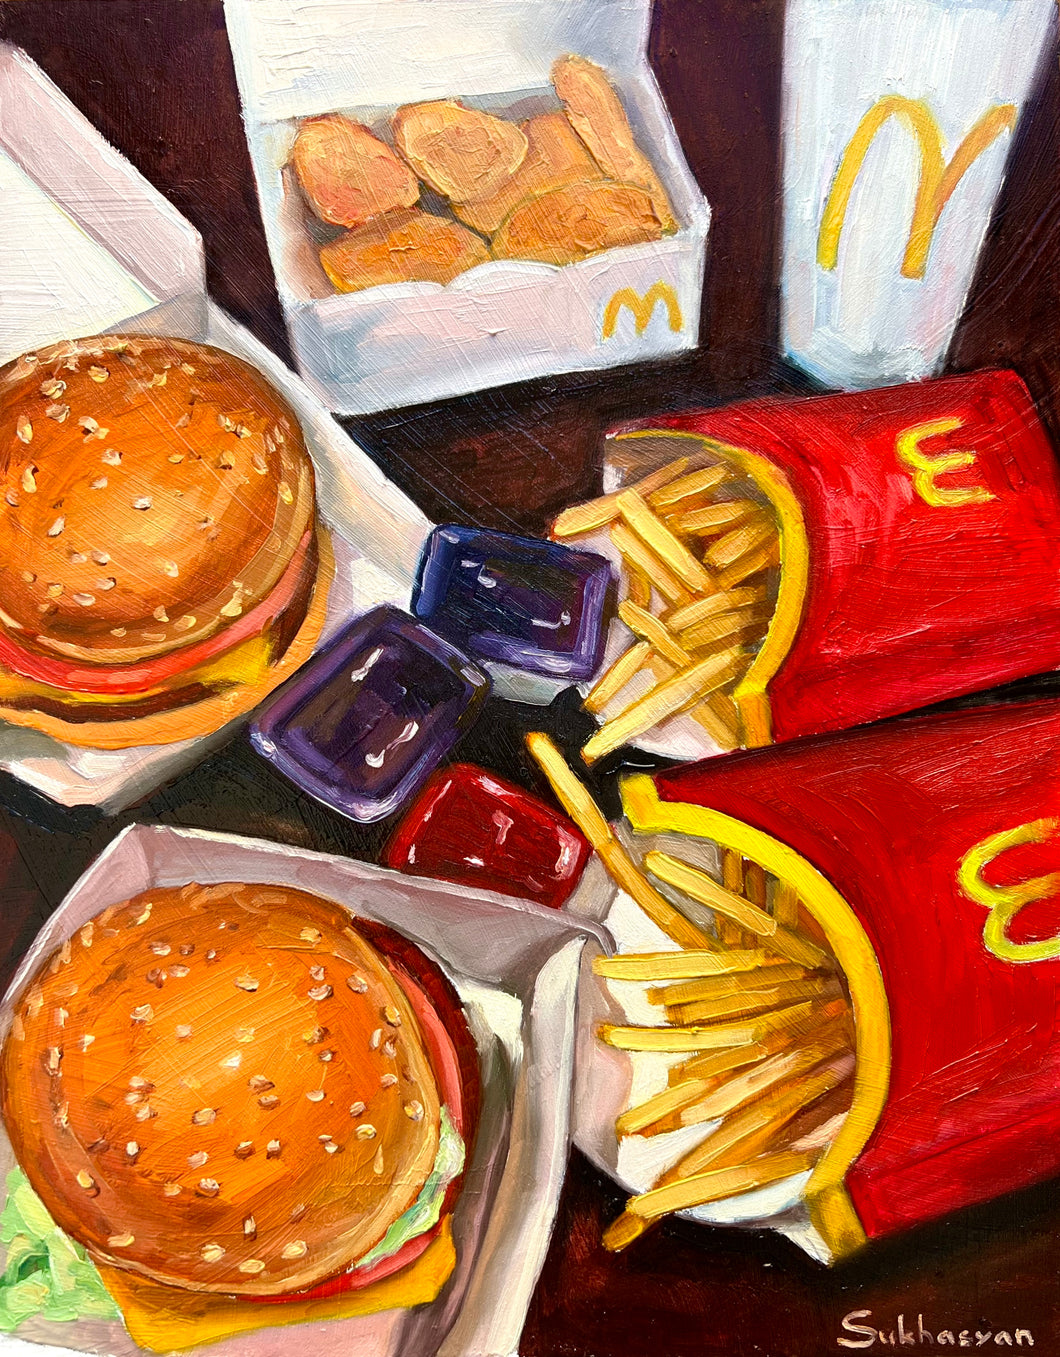 Archival giclée print of the Original acrylic painting Still life with McDonald’s by Victoria Sukhasyan.